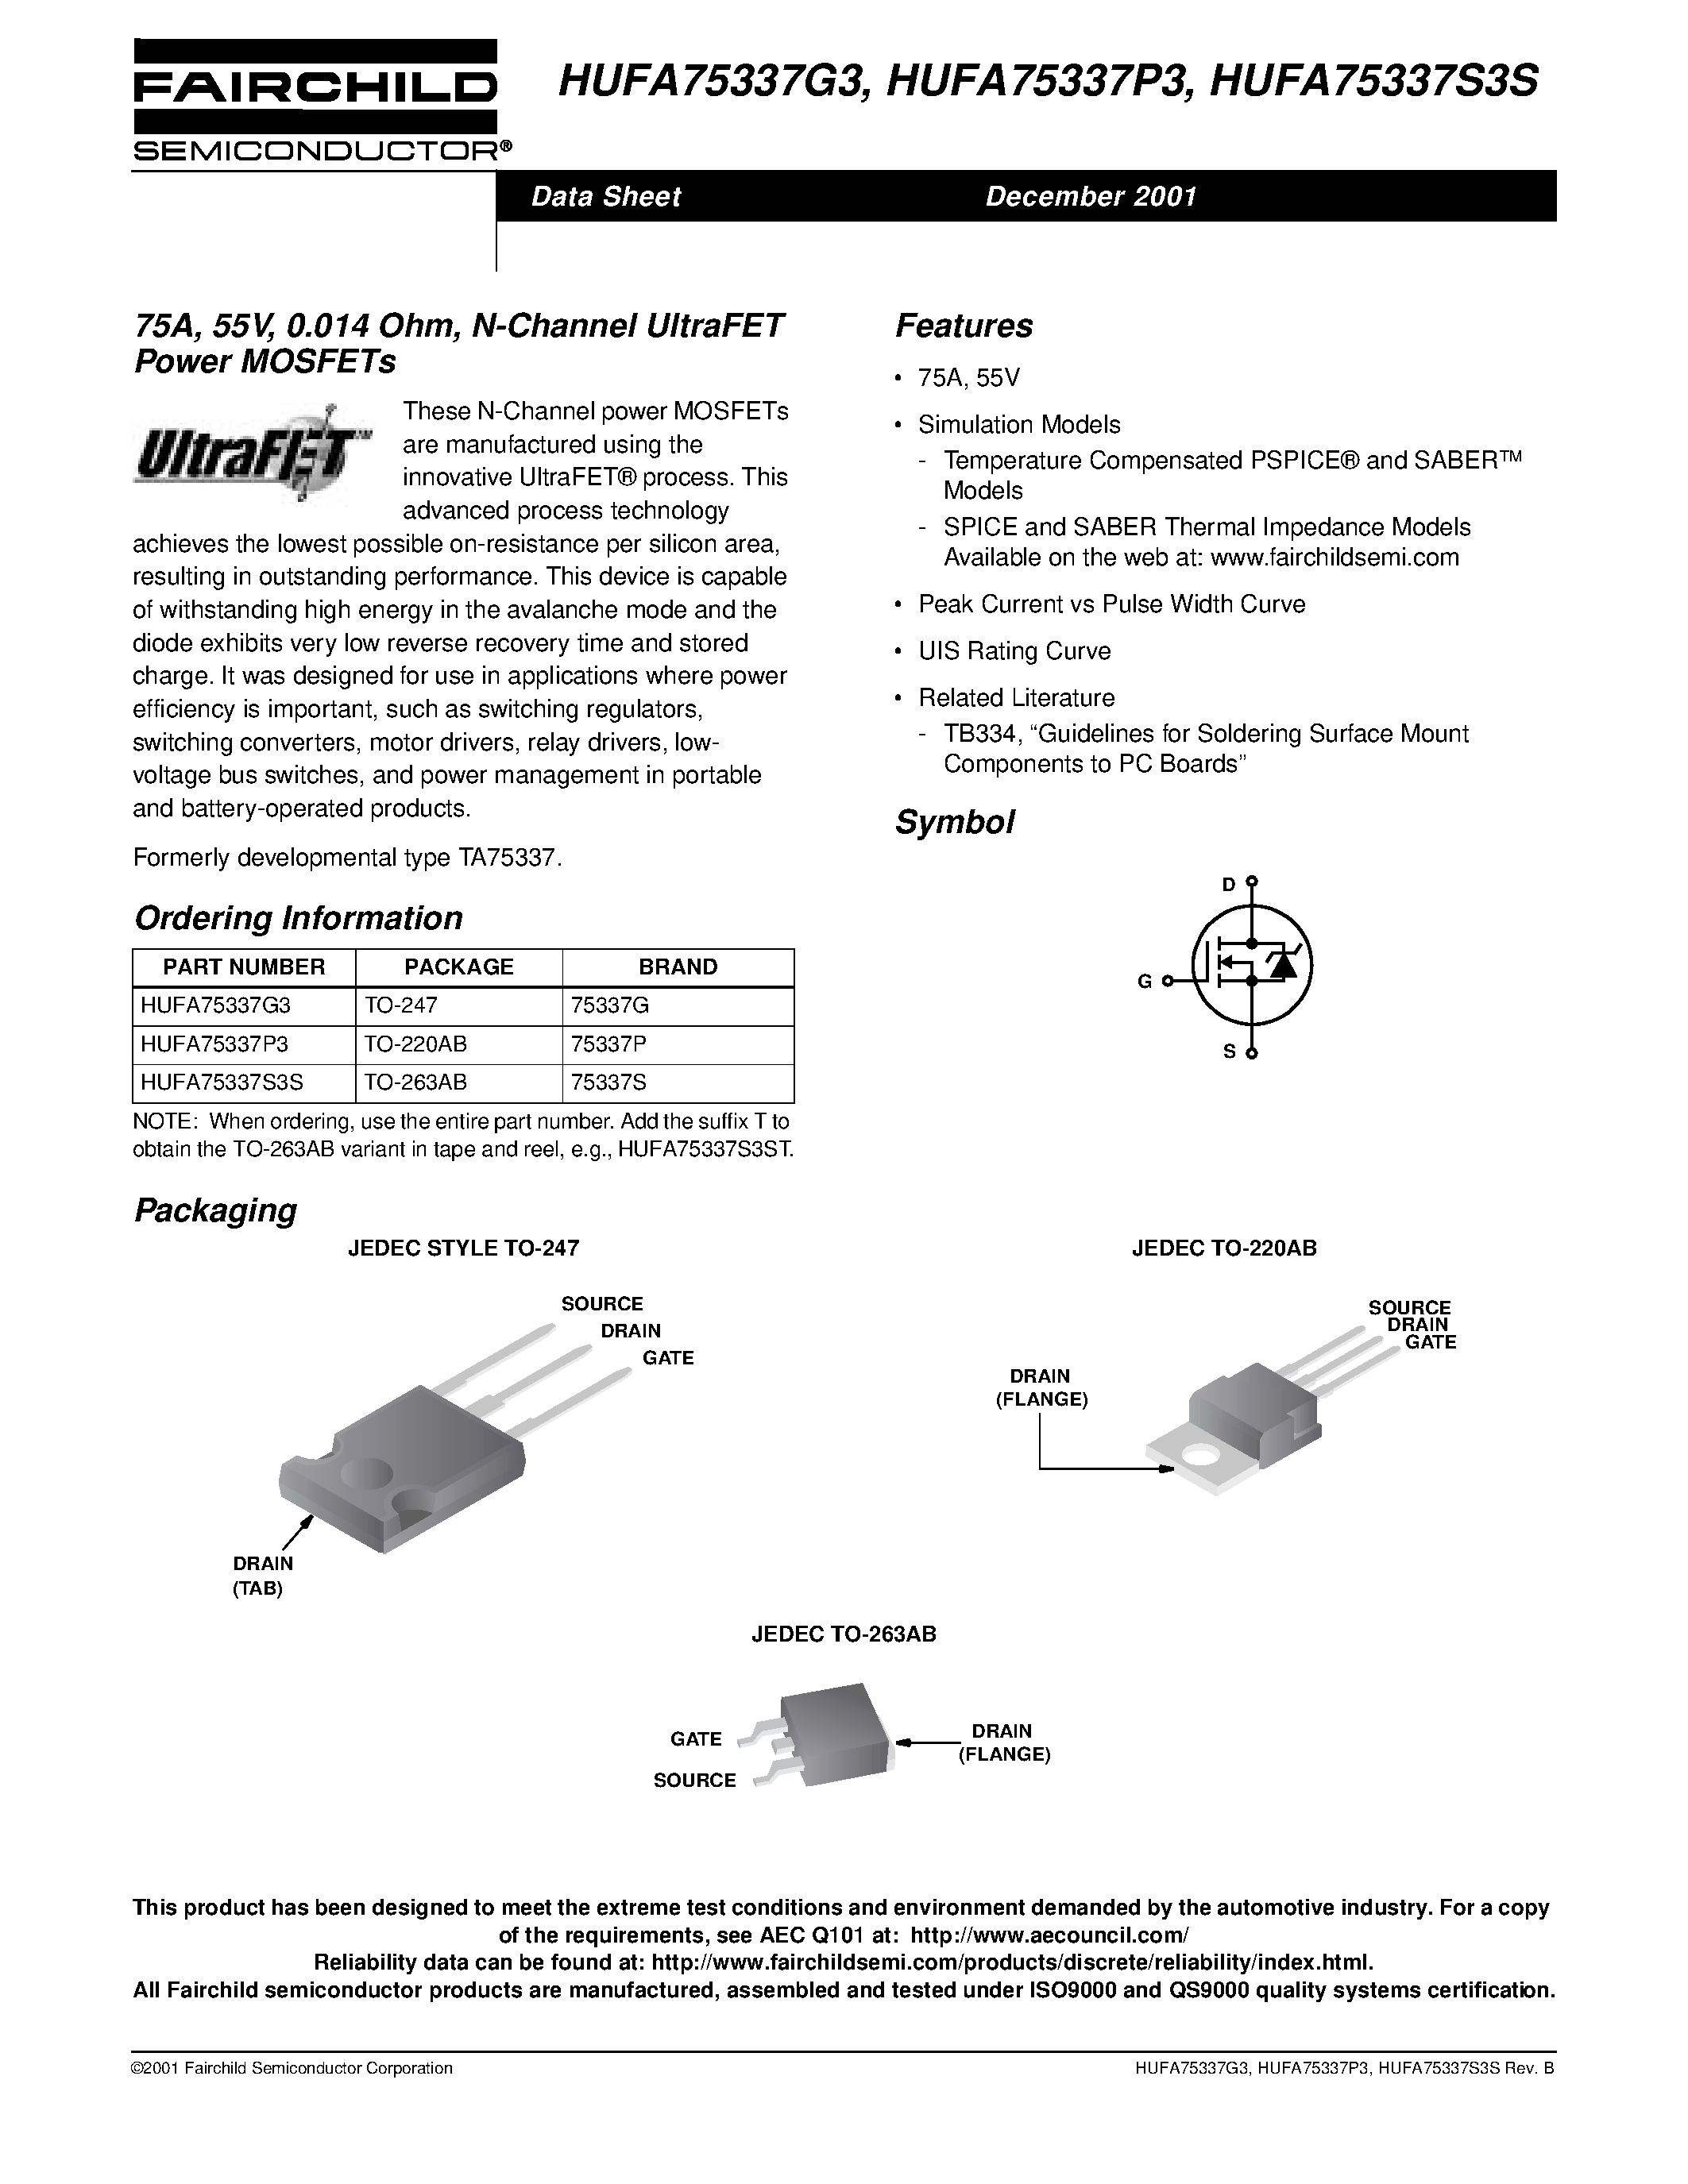 Даташит HUFA75337S3S - 75A/ 55V/ 0.014 Ohm/ N-Channel UltraFET Power MOSFETs страница 1